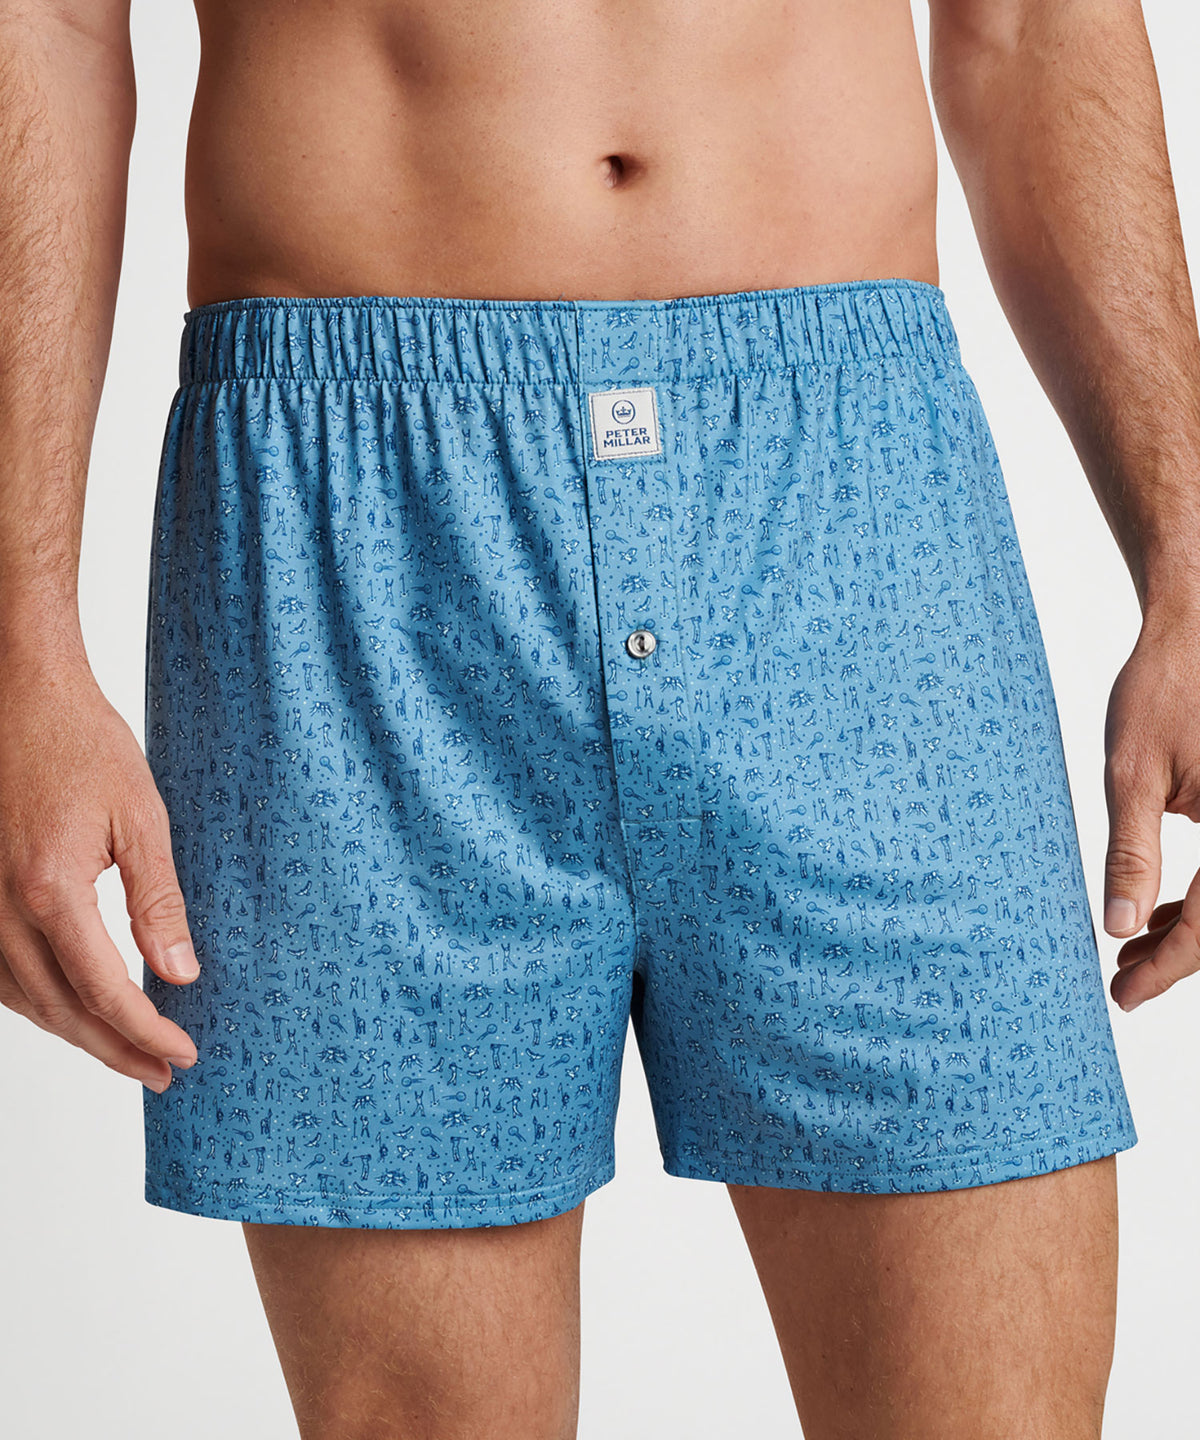 Peter Millar Hole In One Performance Boxer, Men's Big & Tall